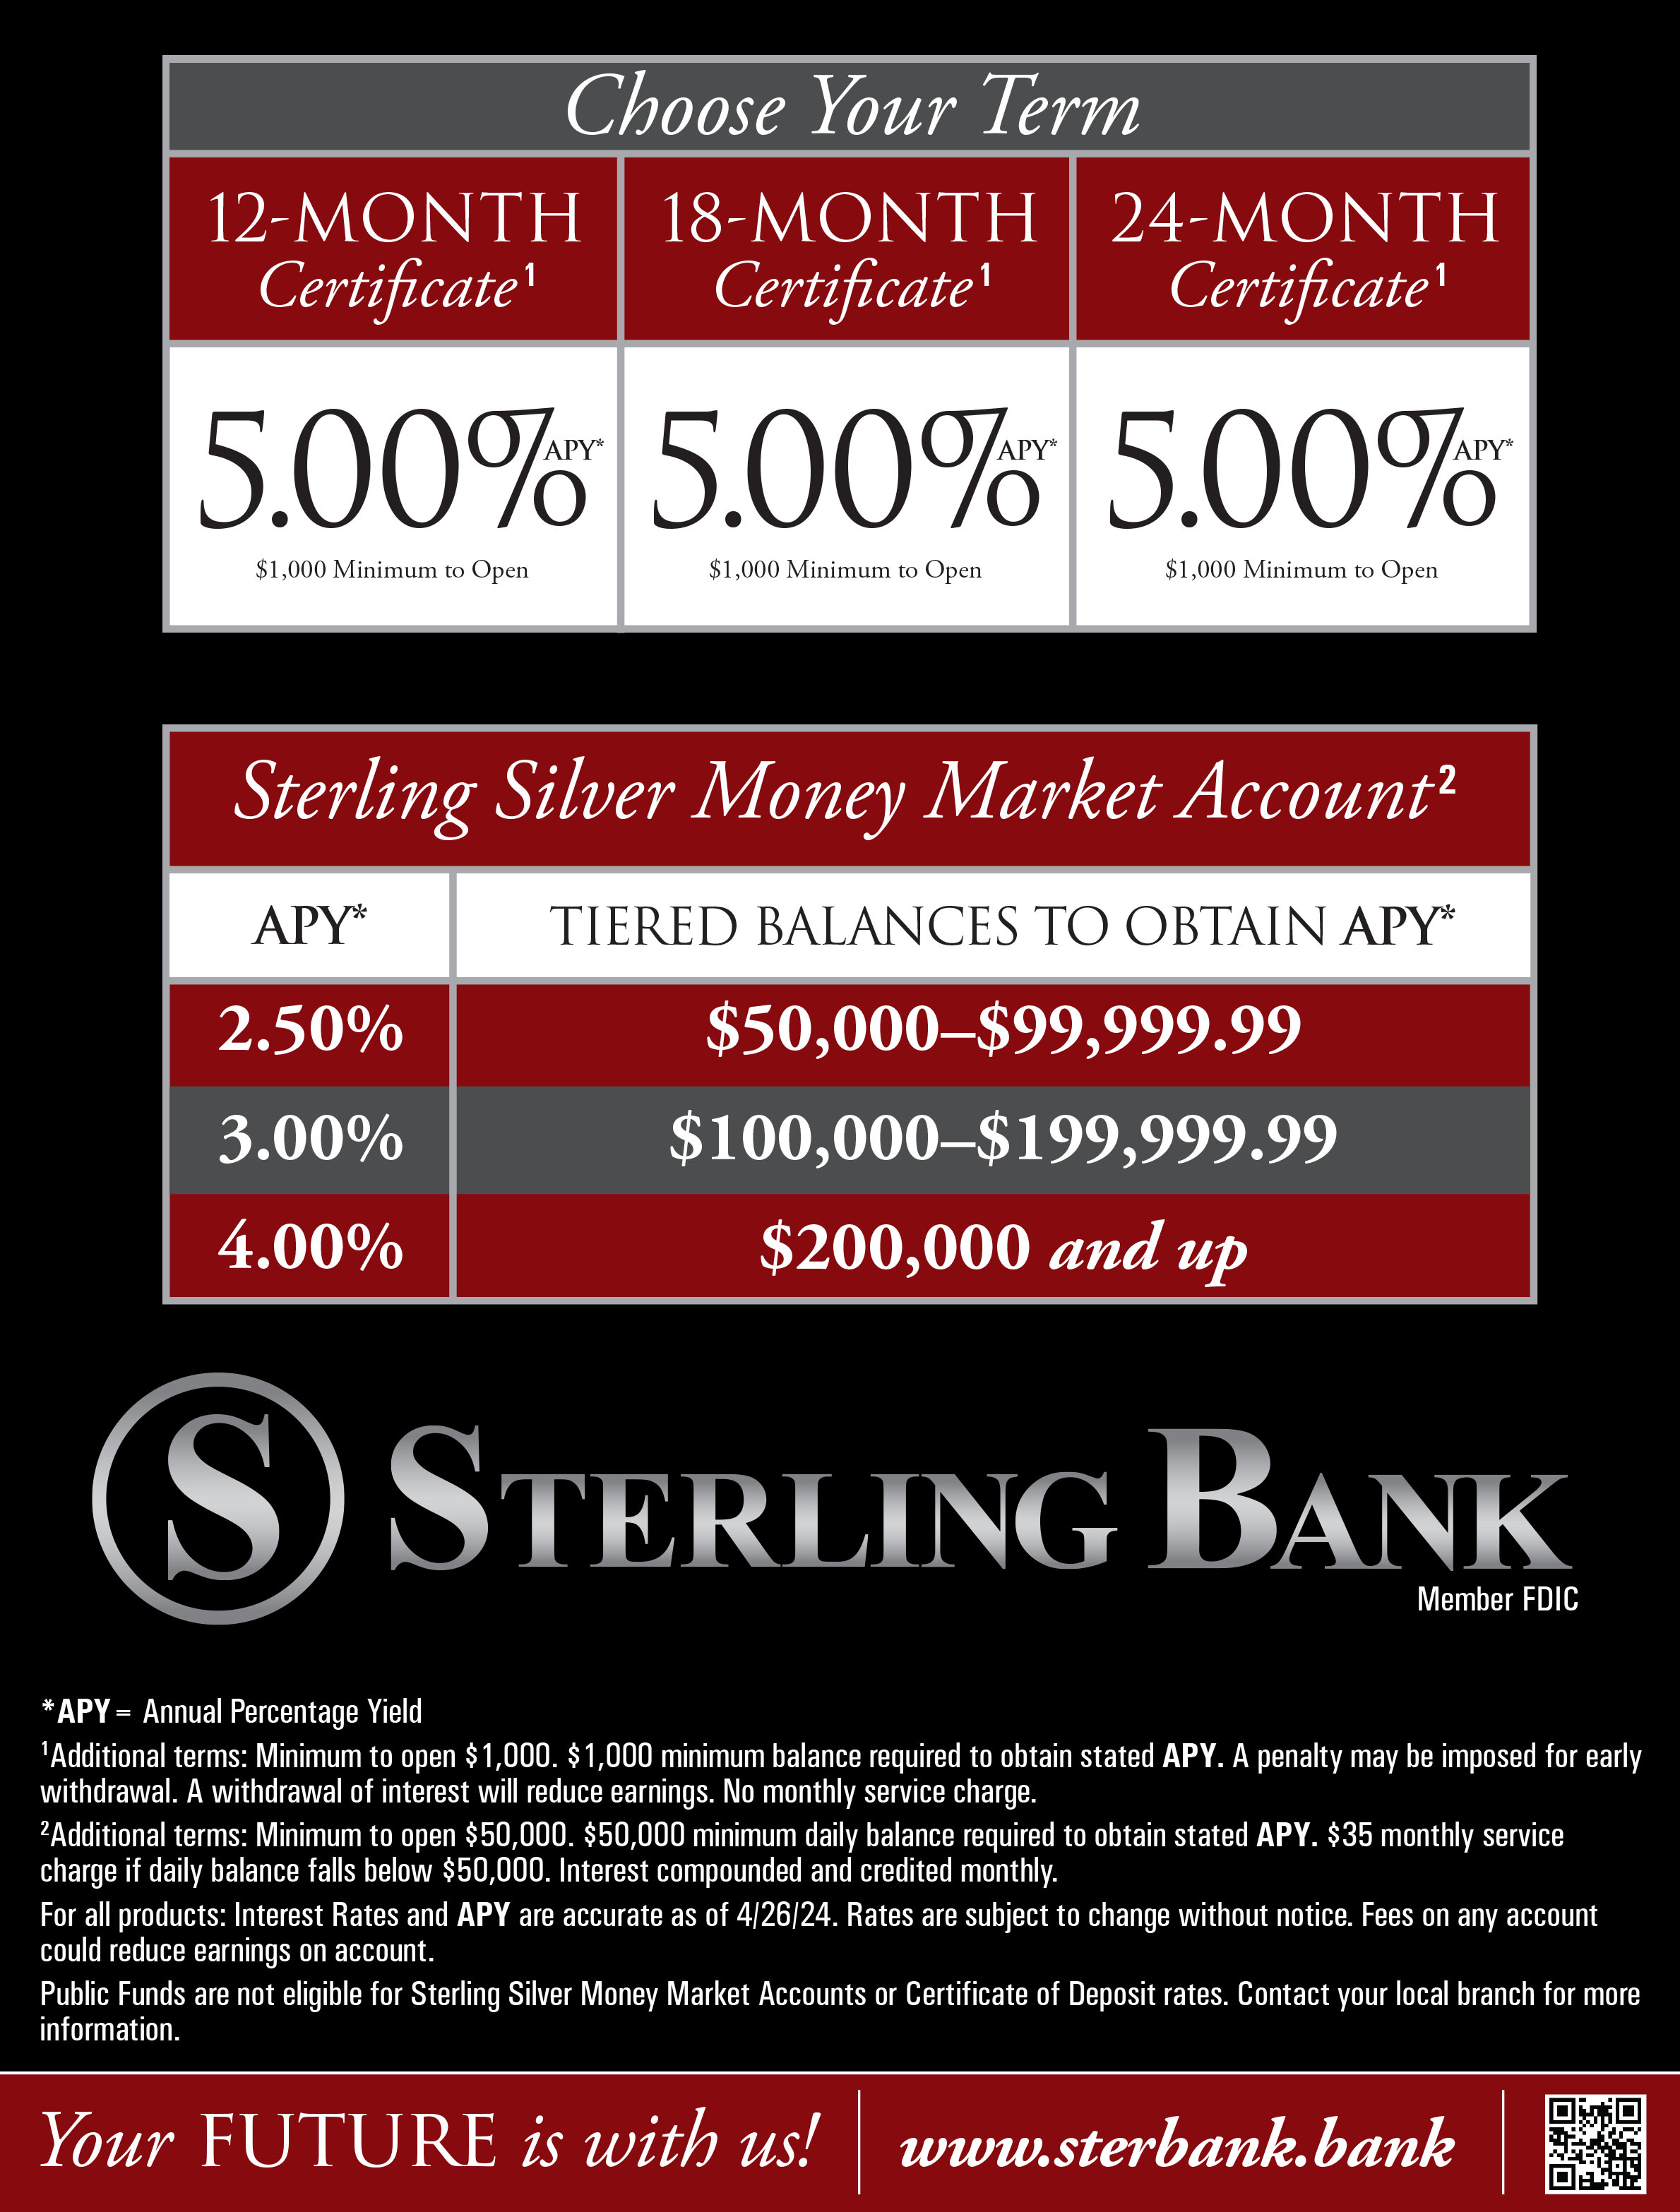 Sterling Silver Money Market Account